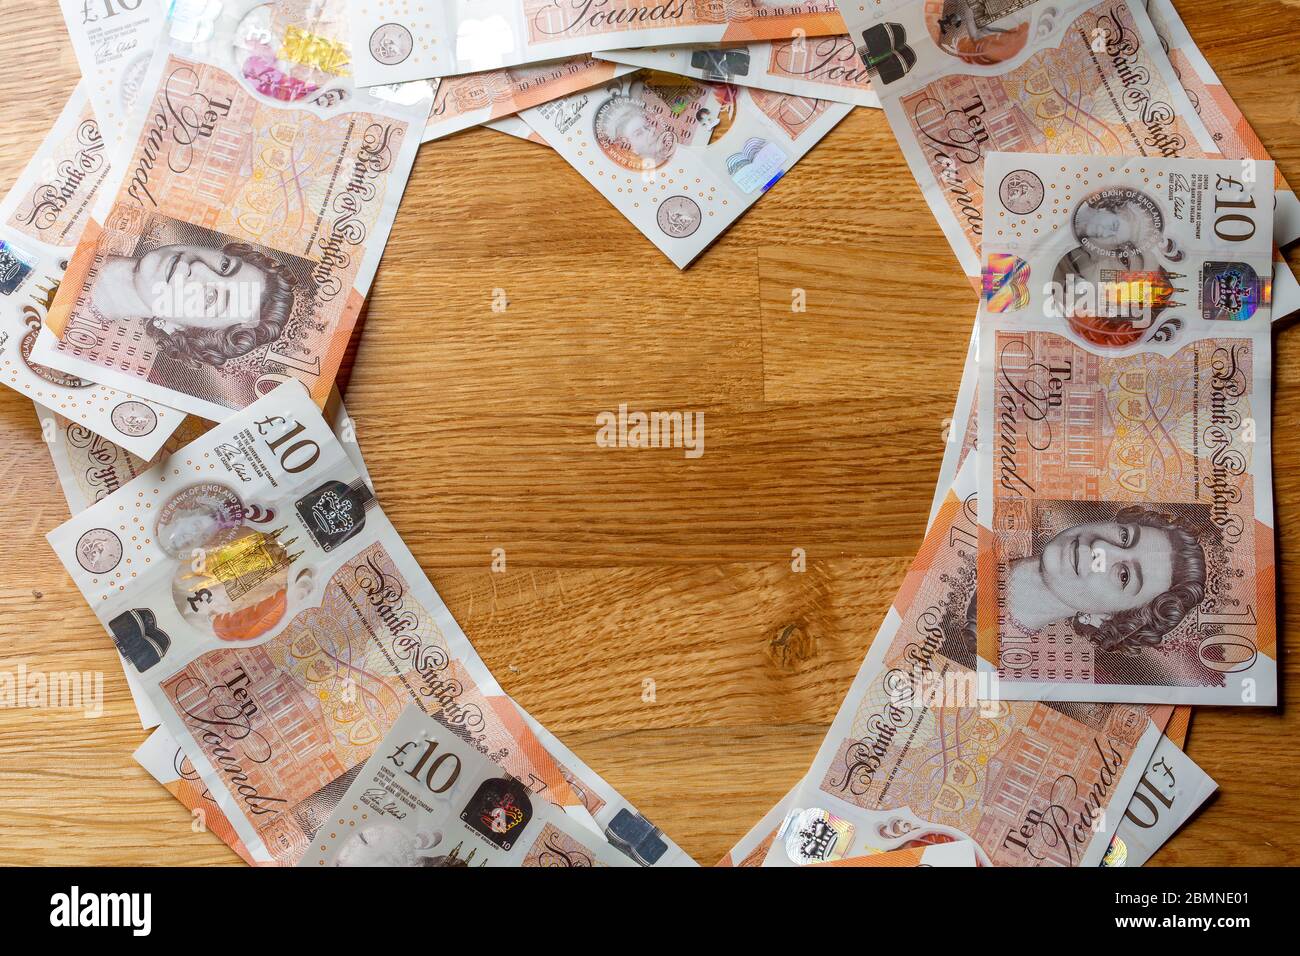 Ten pound notes in the shape of a heart, British sterling cash Stock Photo